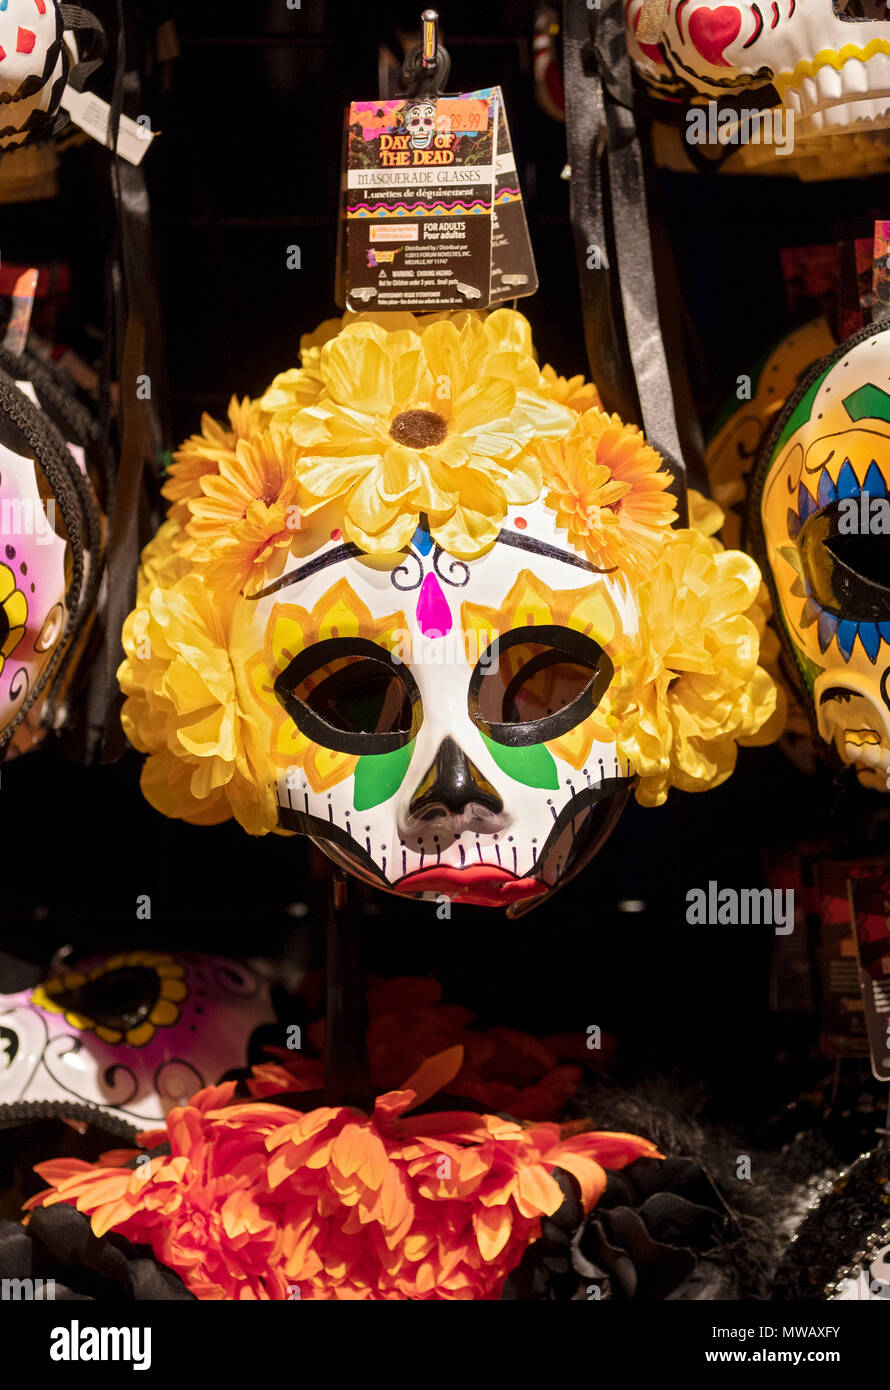 A Day of the Dead face mask for sale at a costume shop in Greenwich Village, Manhattan, New York City. Stock Photo